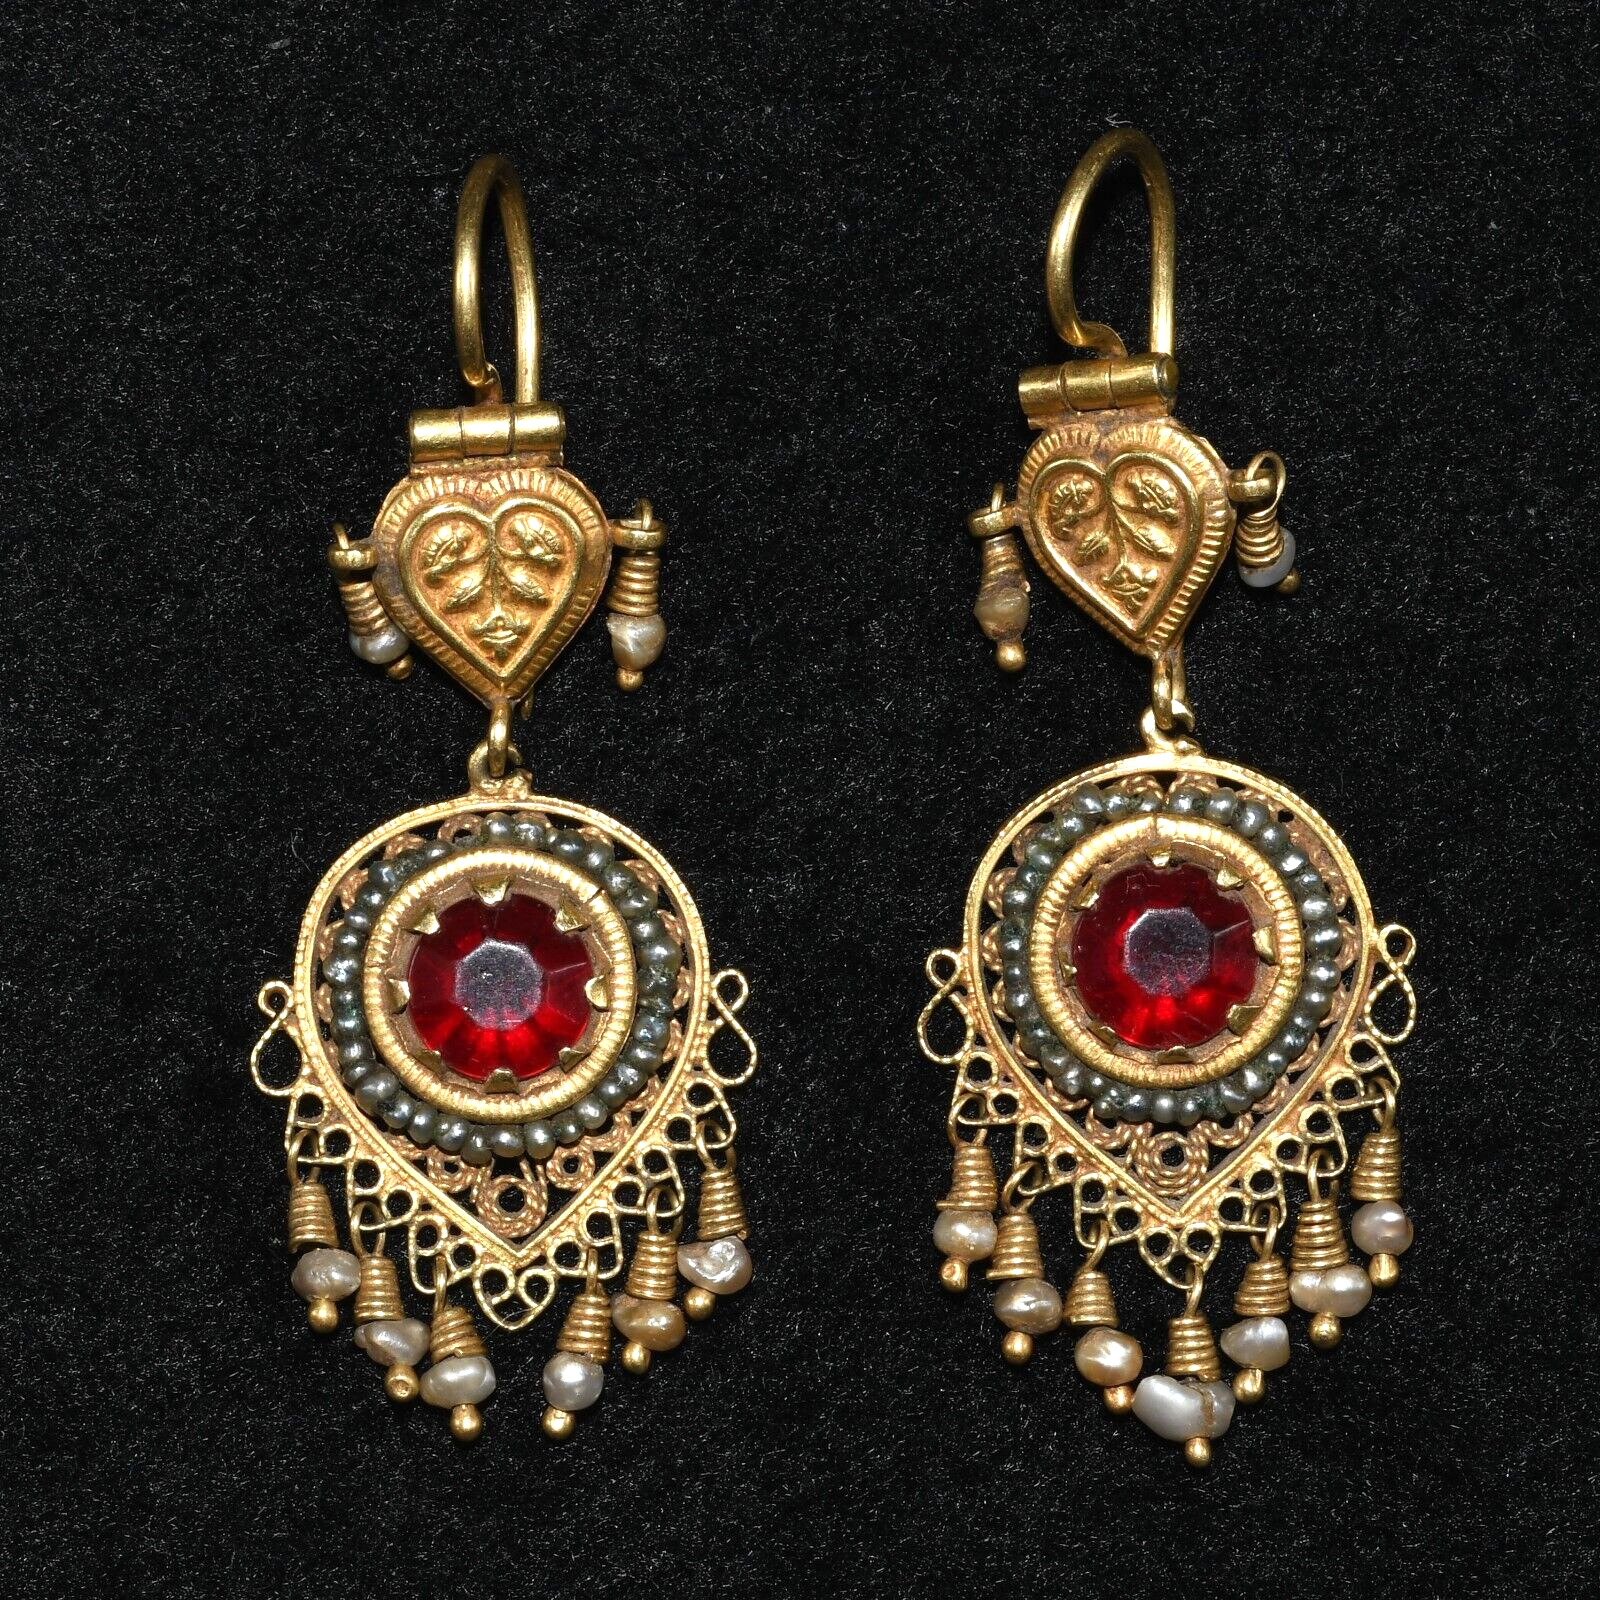 Pair of Ancient Islamic Gold Earrings with Garnet & Pearl Inlay Ca. 11th Century